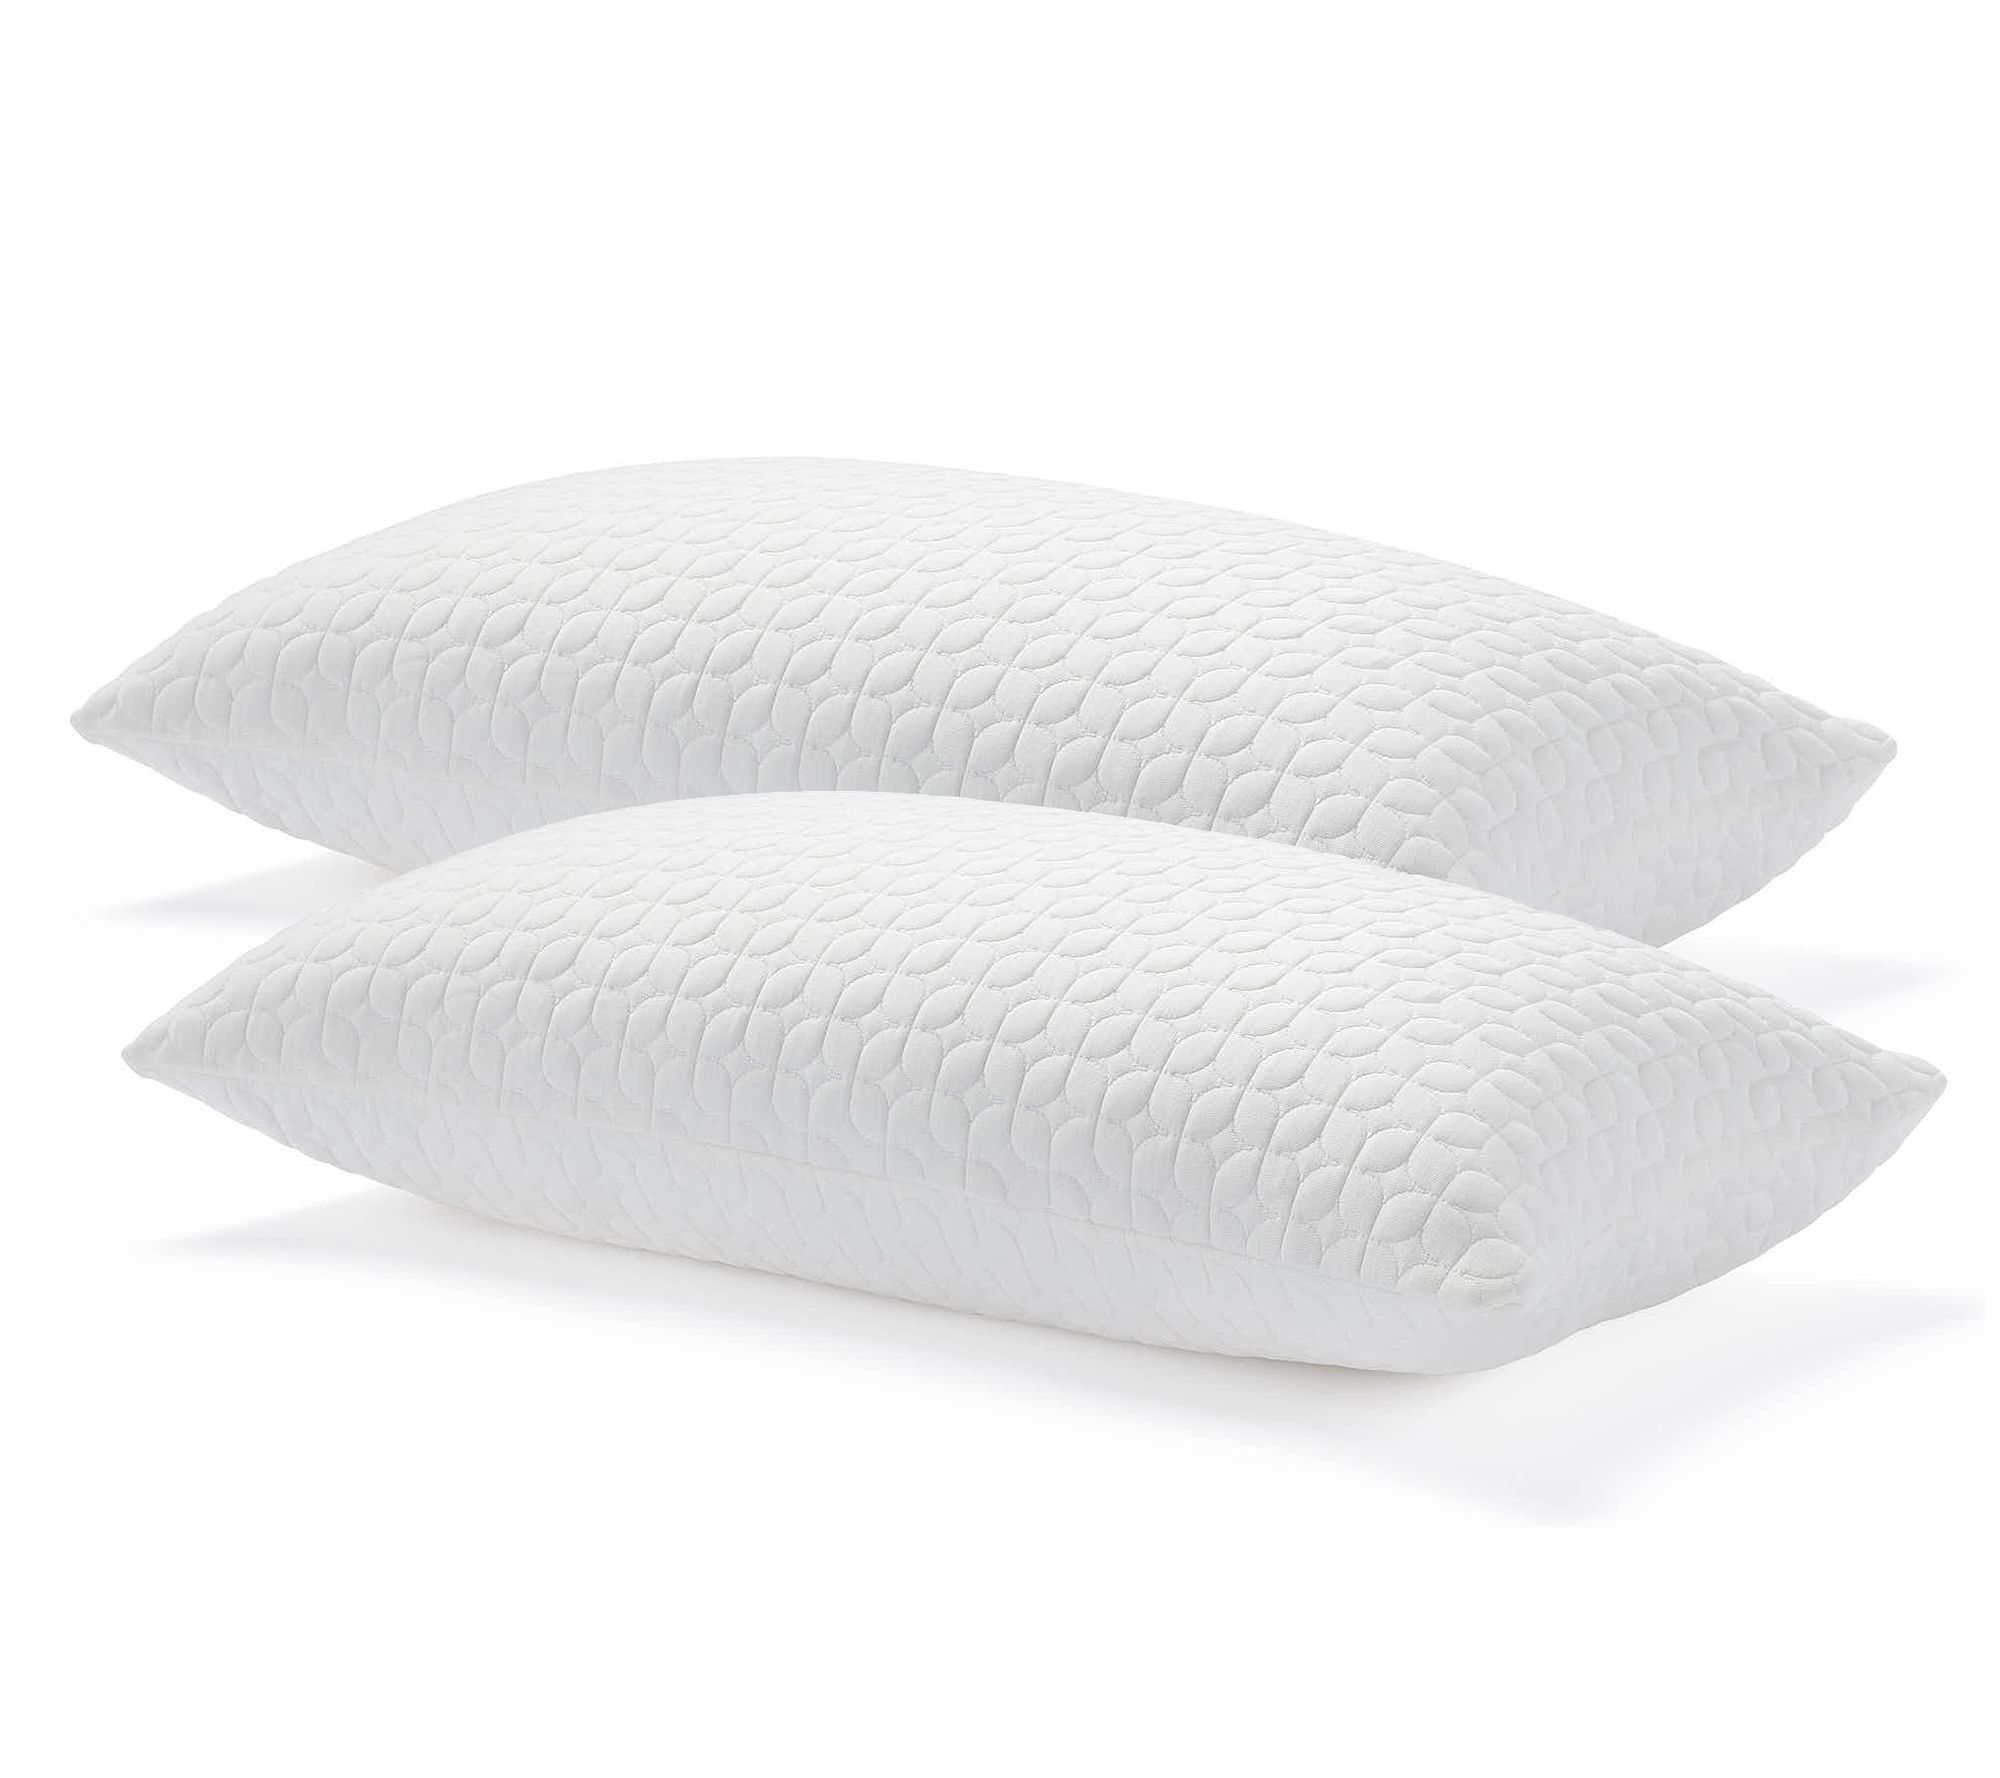  Beckham Hotel Collection Queen/Standard Size Memory Foam Bed  Pillows Set of 2 - Cooling Shredded Foam Pillow for Back, Stomach or Side  Sleepers : Home & Kitchen